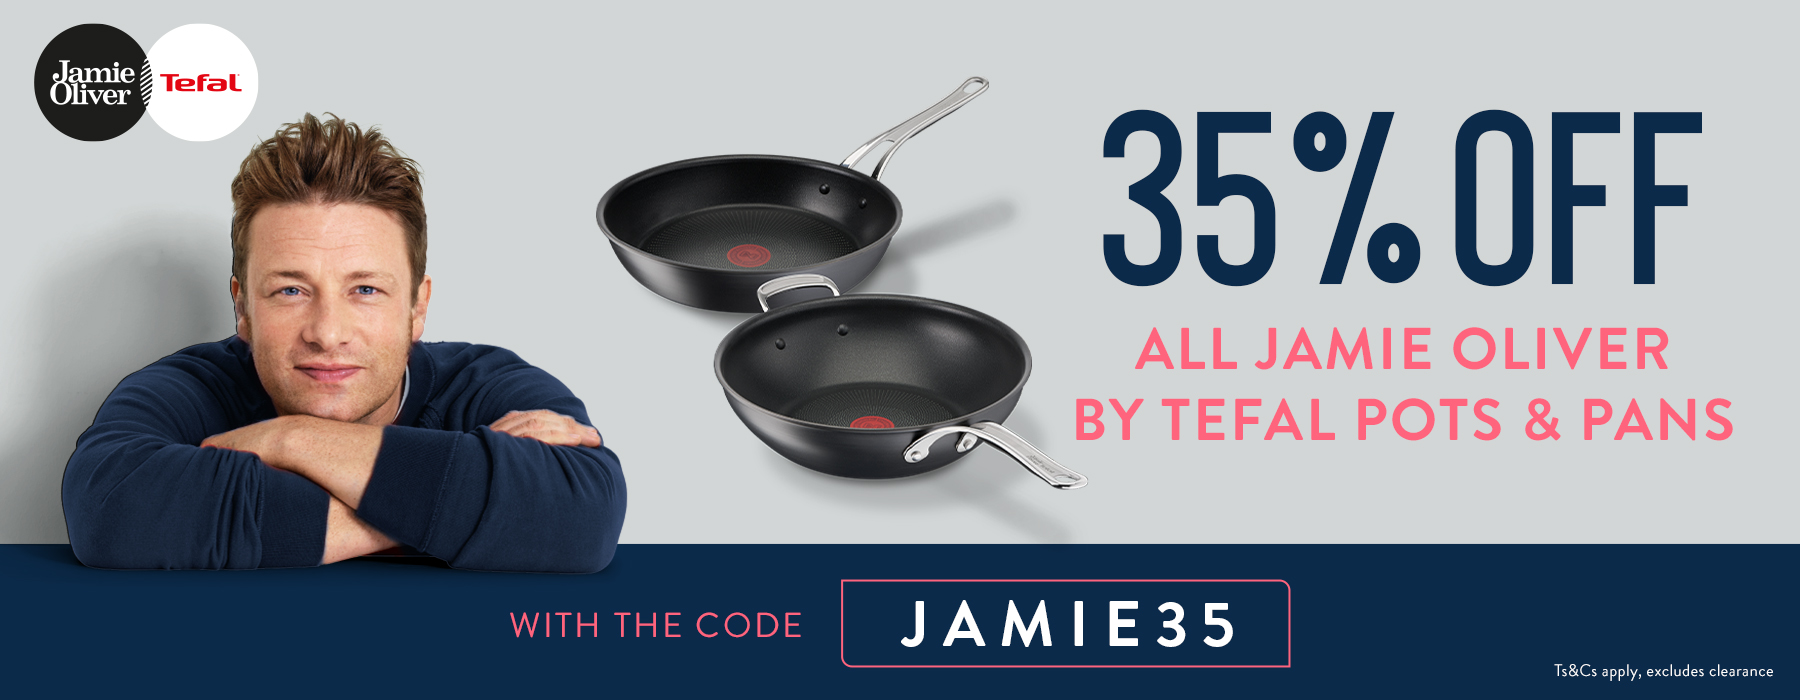 cate-promo-banner-Jamie Oliver Saucepans & Stewpots